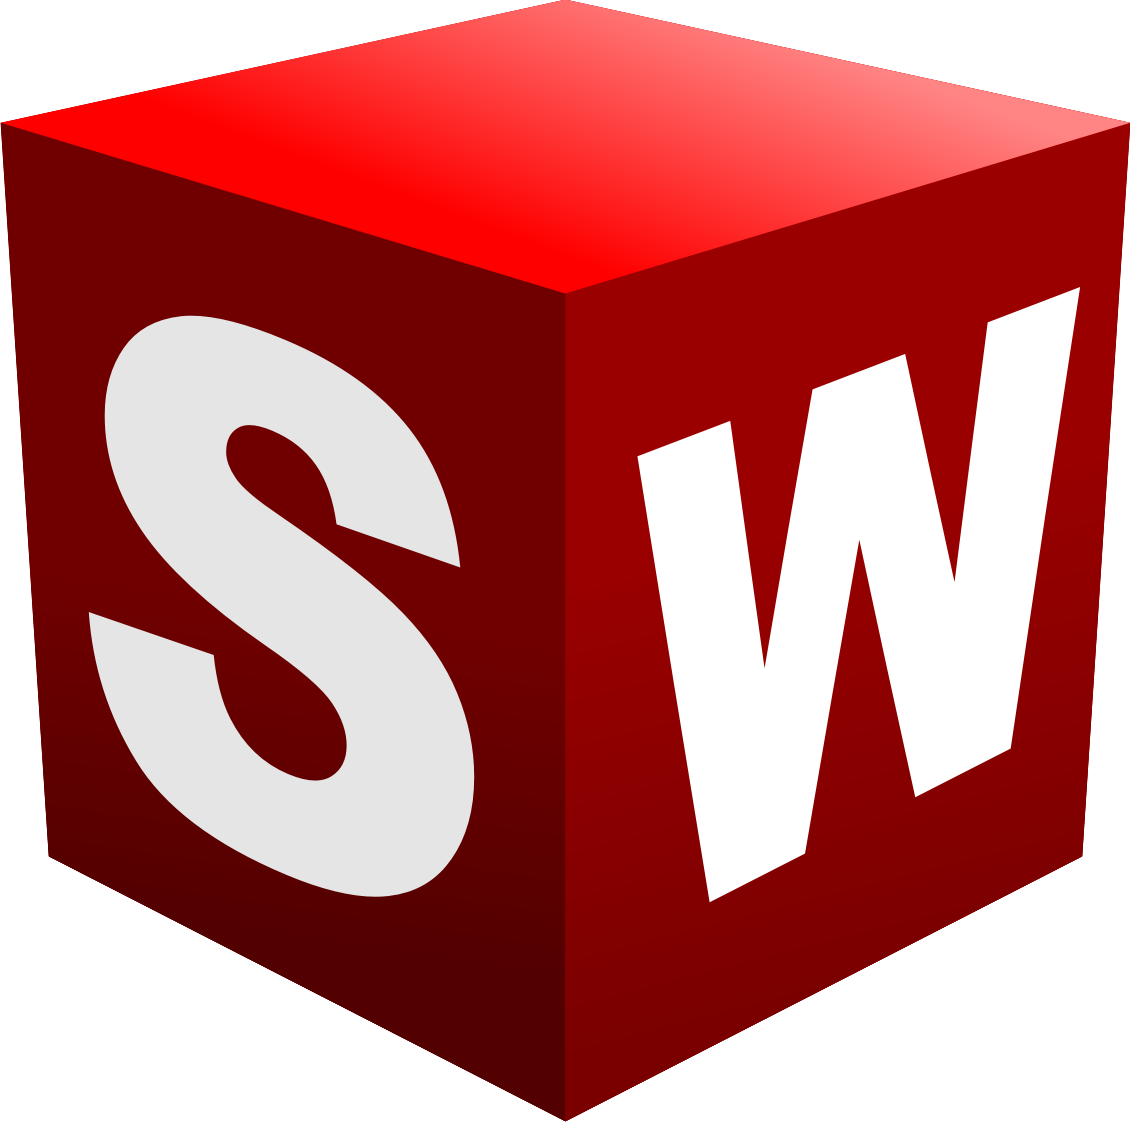 Download Solidworks 2013 Free